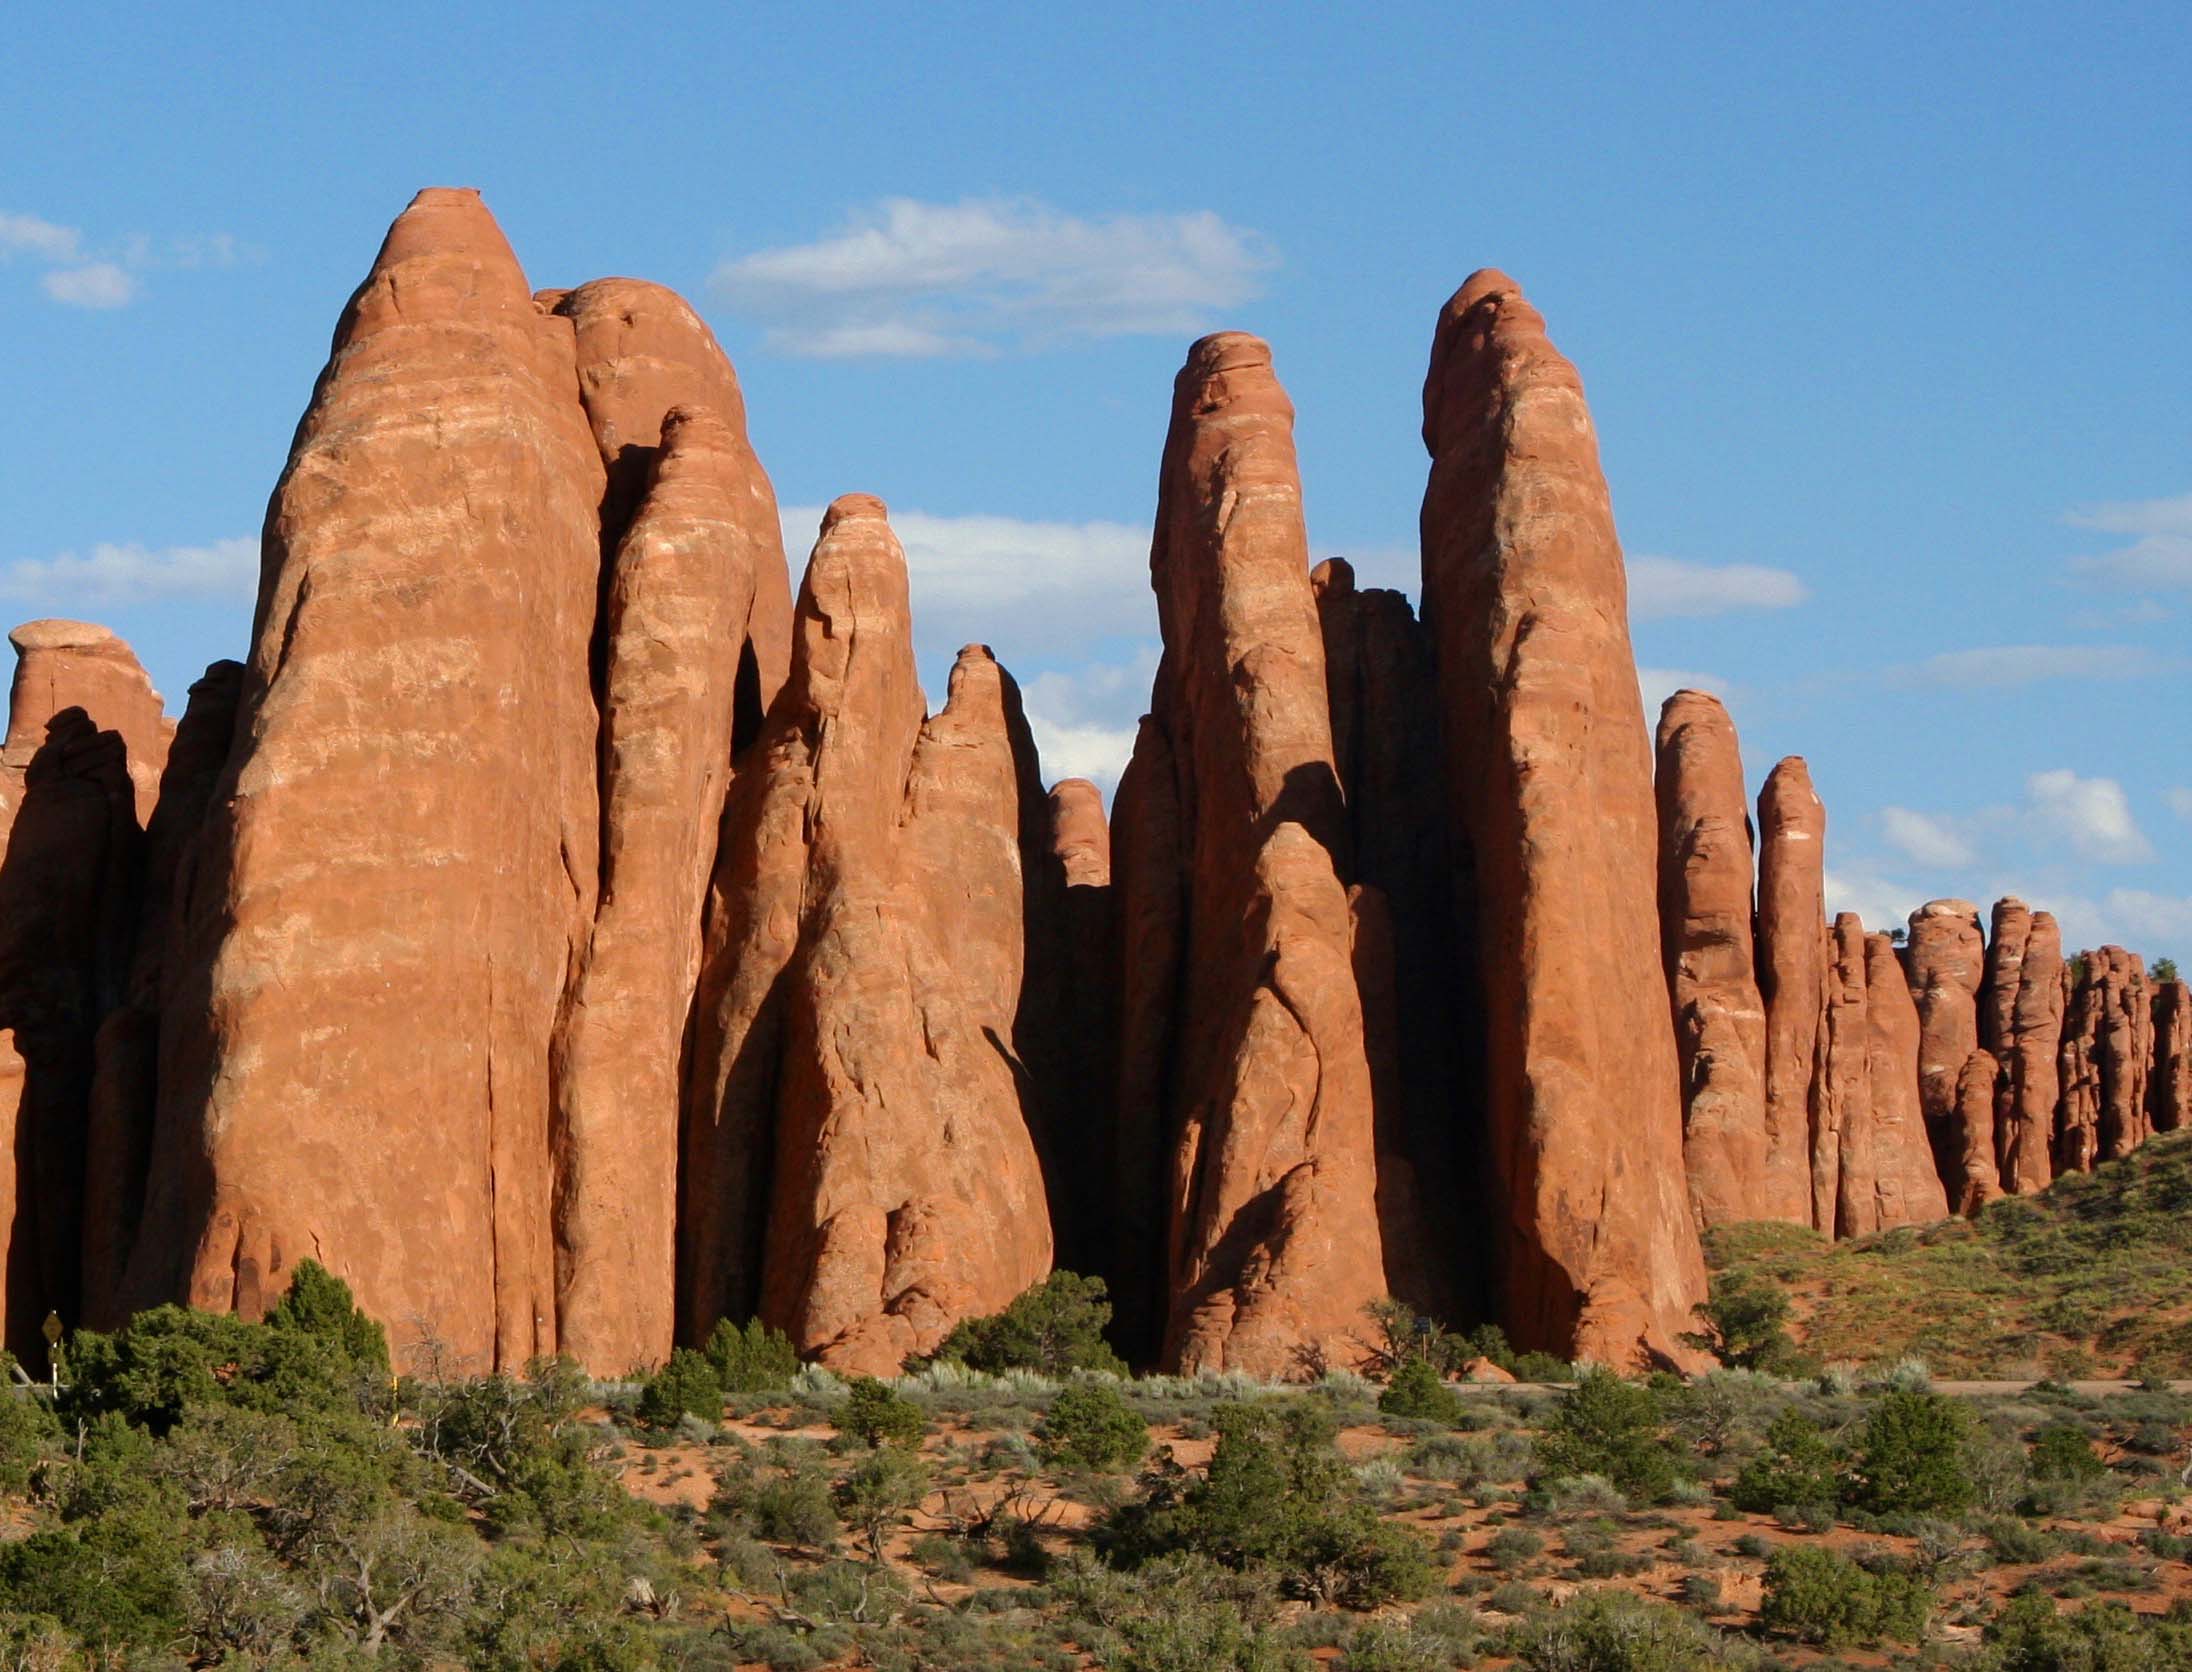 Photos of Arches National Park by Curt and Peggy Mekemson.